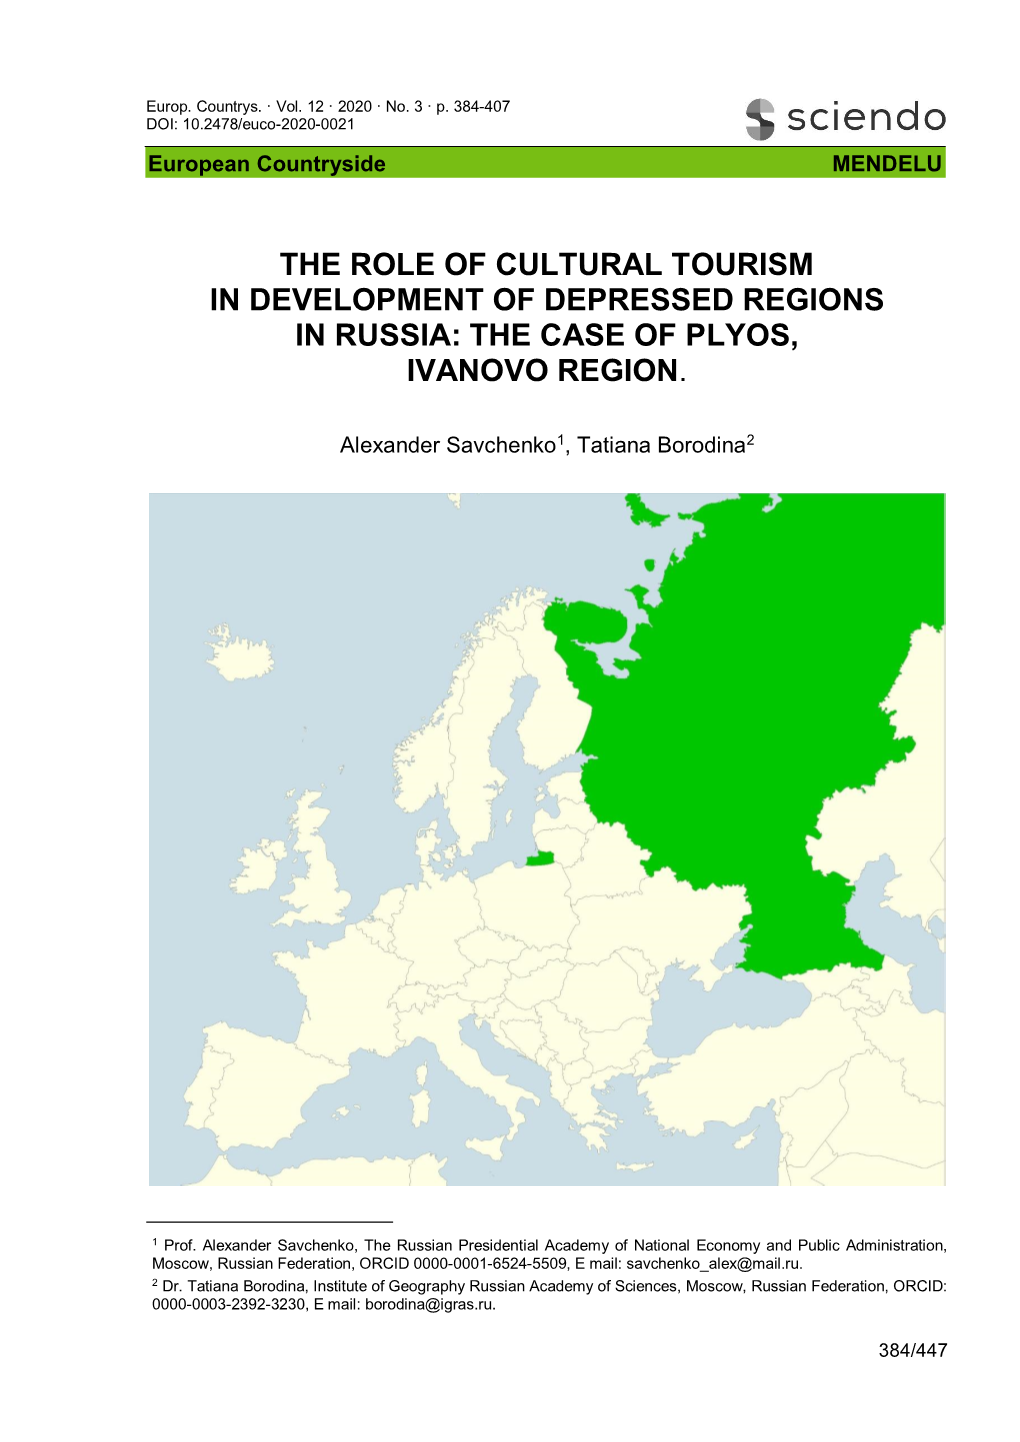 The Role of Cultural Tourism in Development of Depressed Regions in Russia: the Case of Plyos, Ivanovo Region